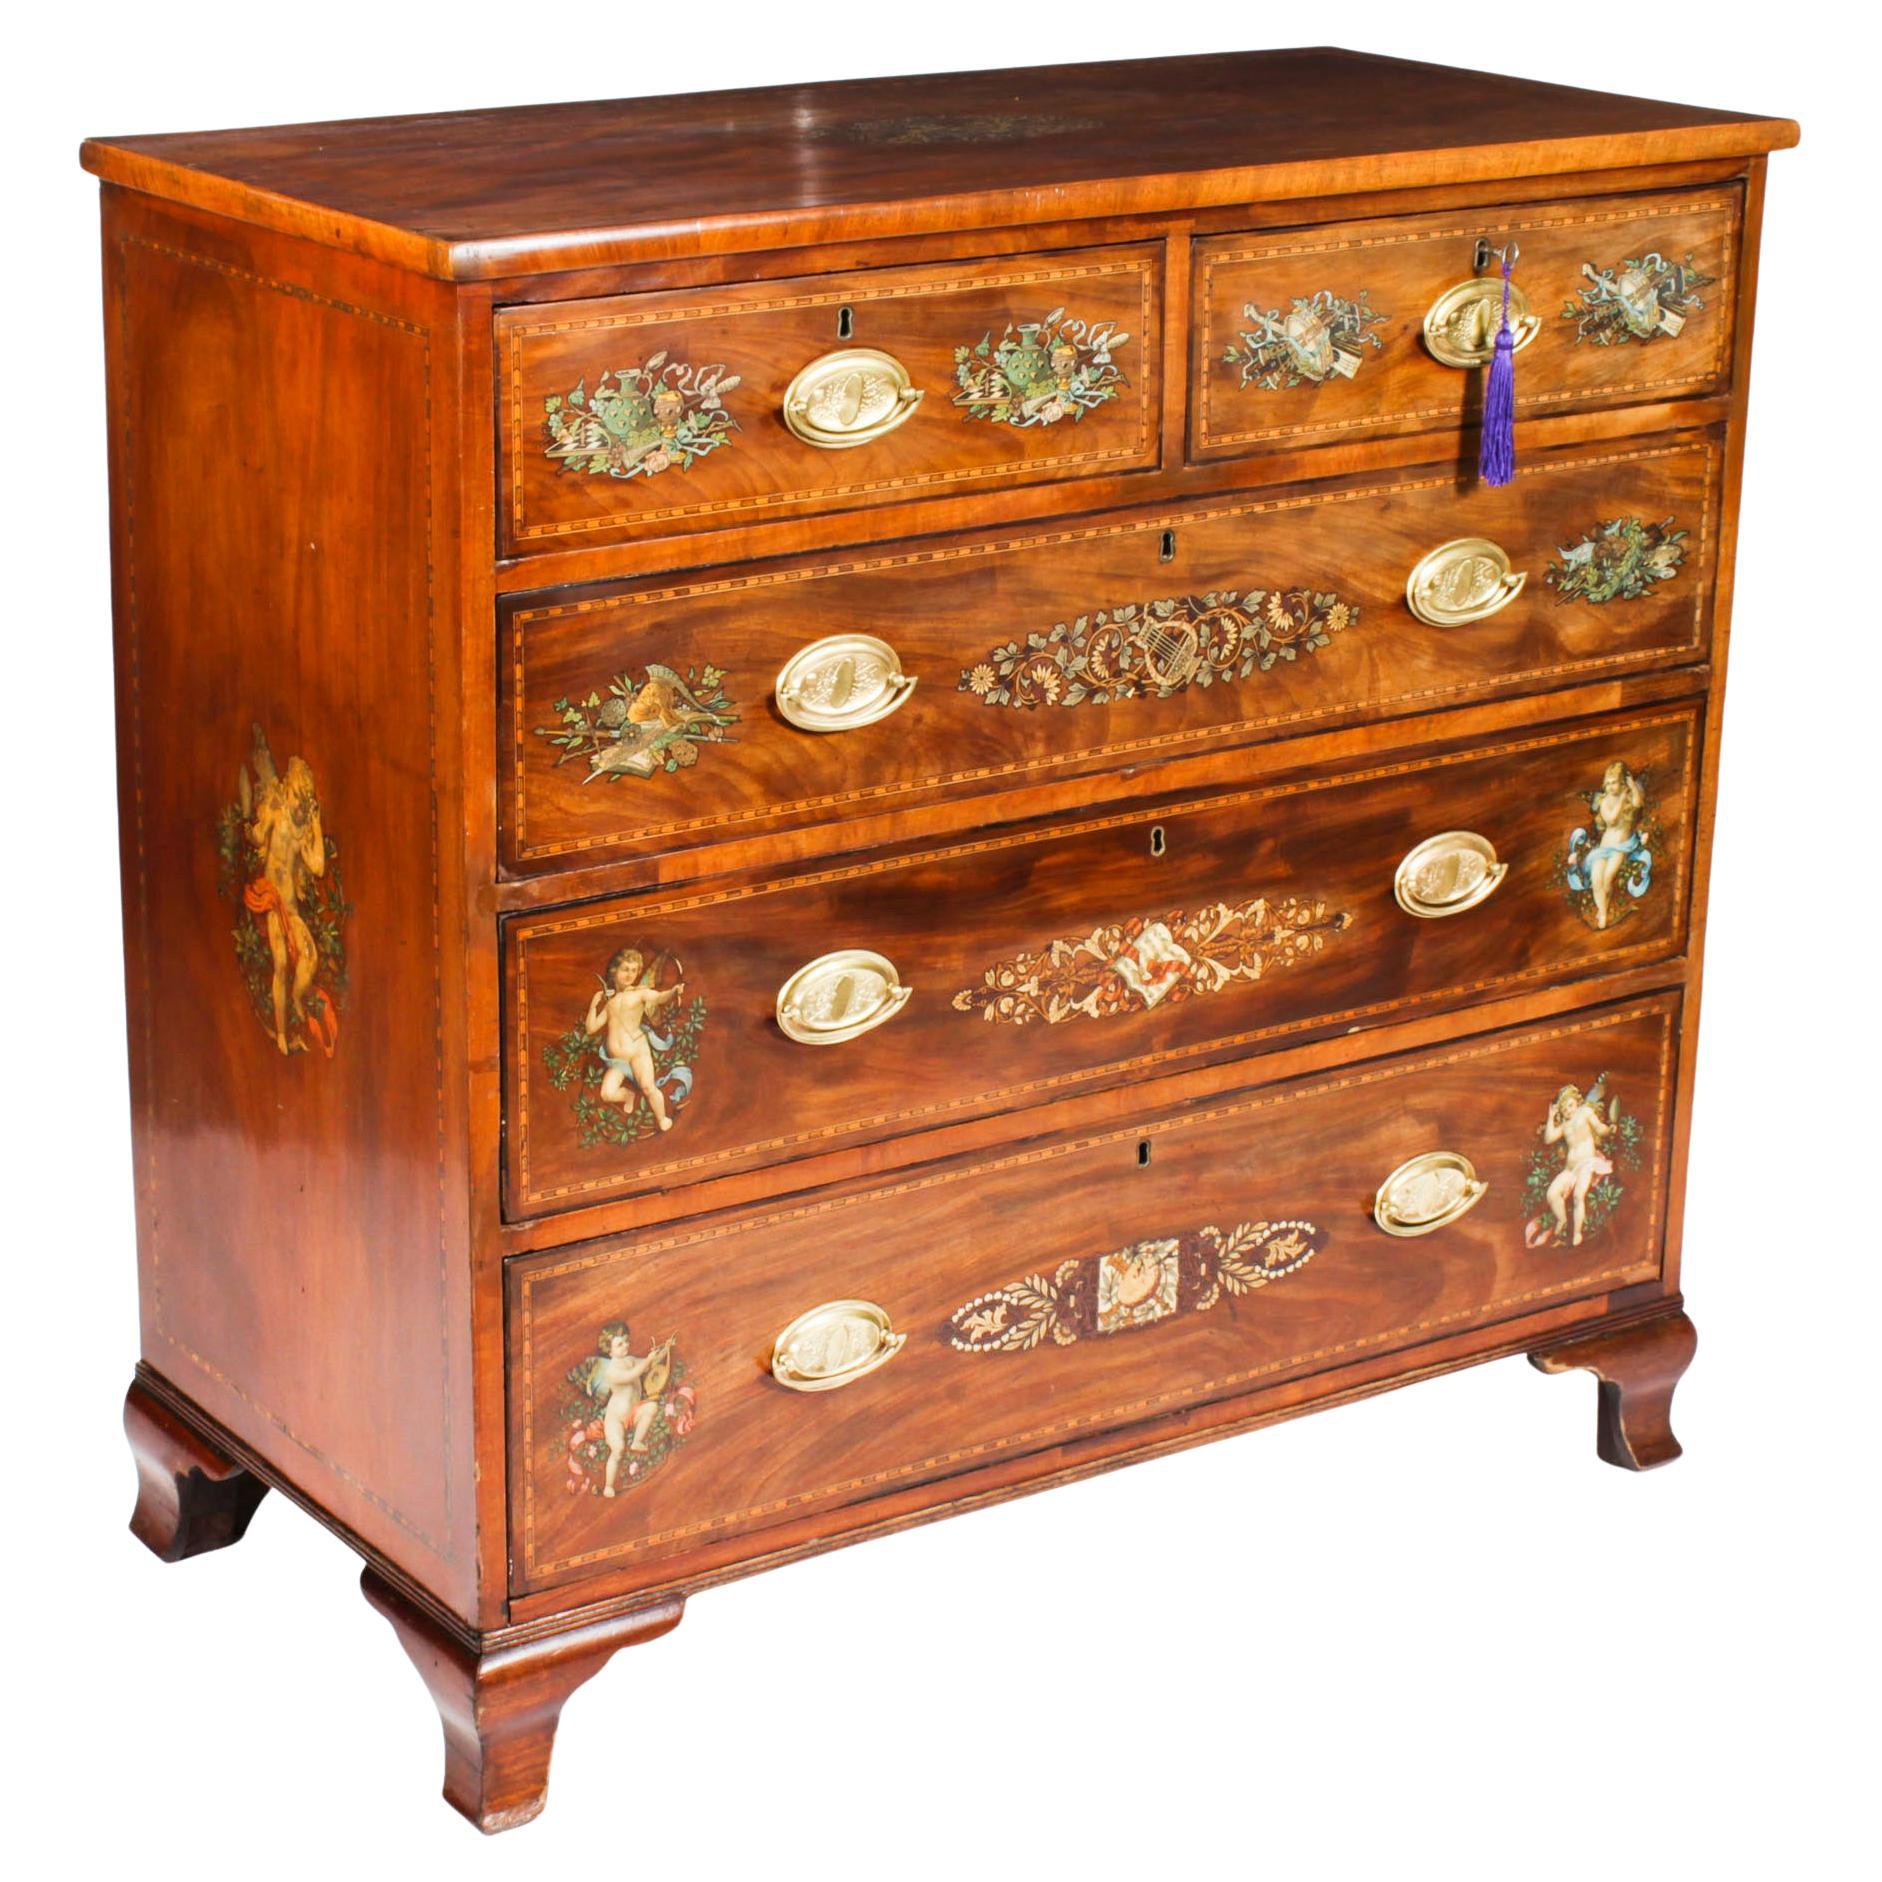 Antique George III Sheraton Painted Chest Drawers Late 18th Century For Sale